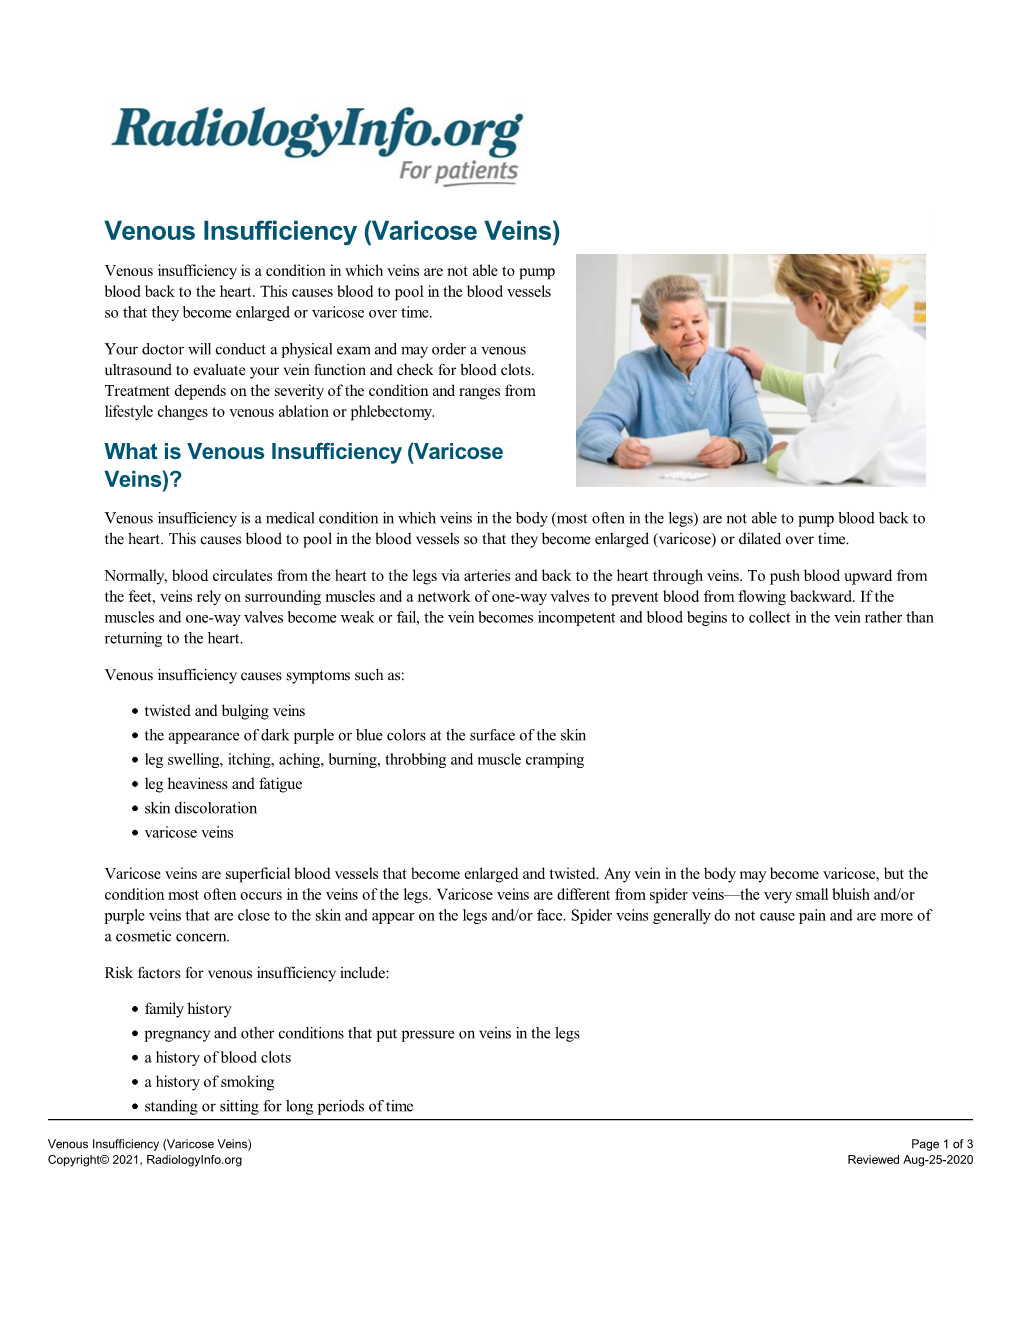 Varicose Veins) Venous Insufficiency Is a Condition in Which Veins Are Not Able to Pump Blood Back to the Heart